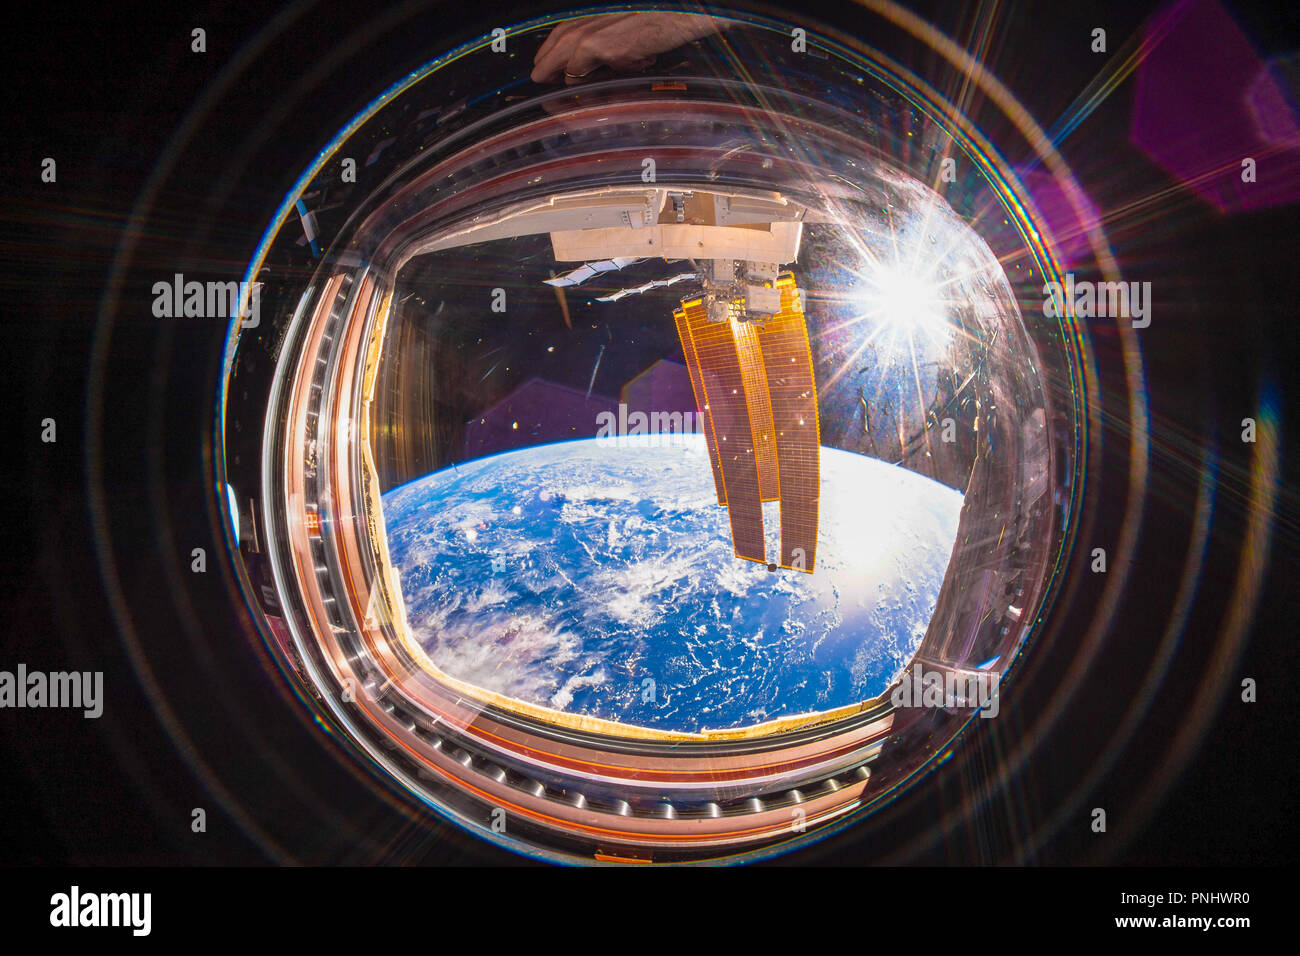 The beautiful planet Earth is seen from inside the International Space Station (ISS). Wide angle view with the sun in the image. Stock Photo